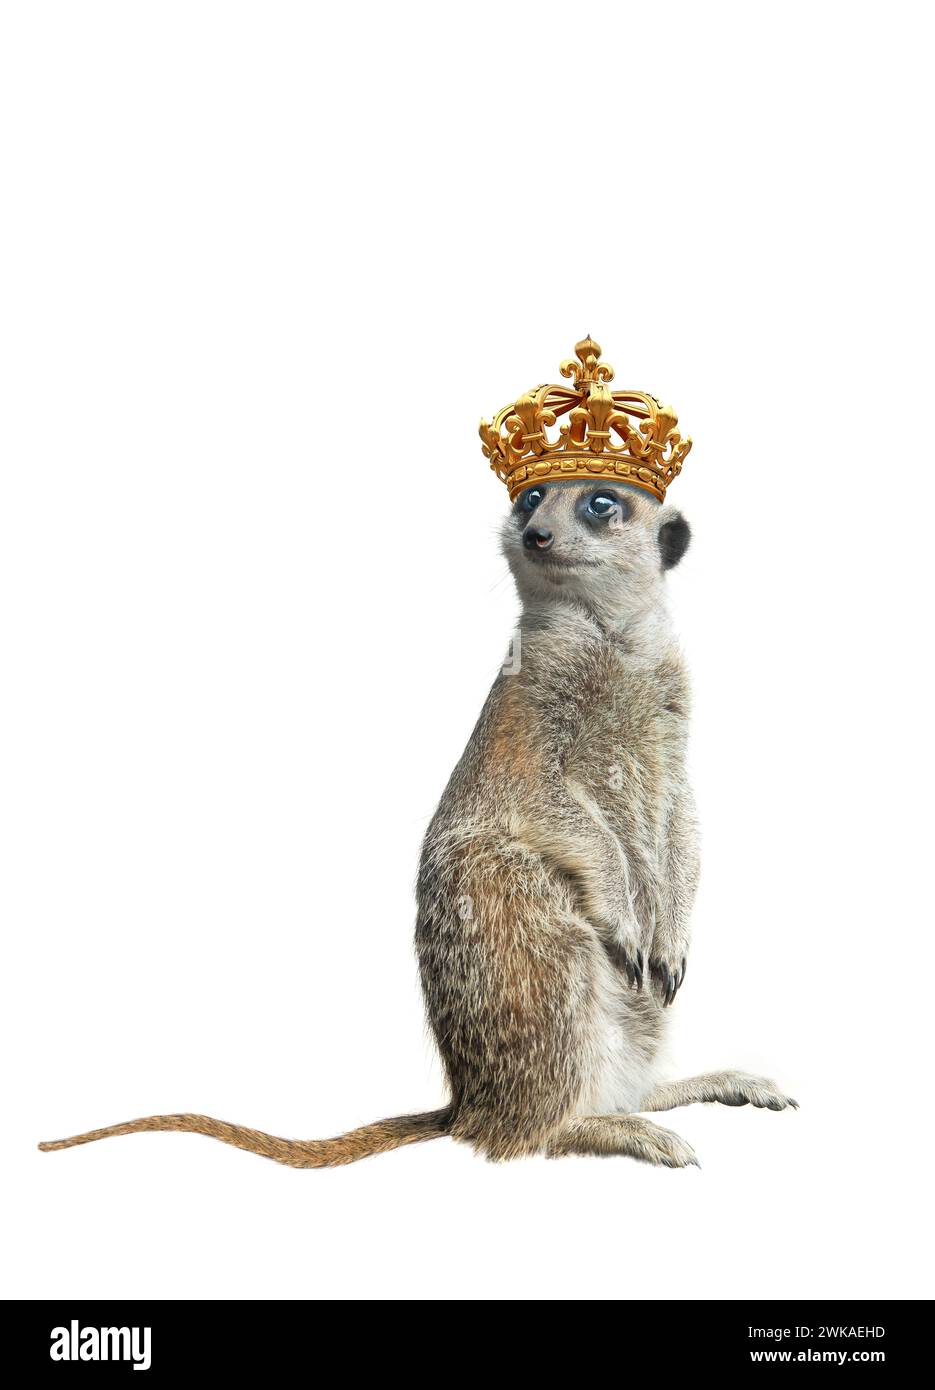 cowardly meerkat standing royal crown isolated on a white background. Stock Photo